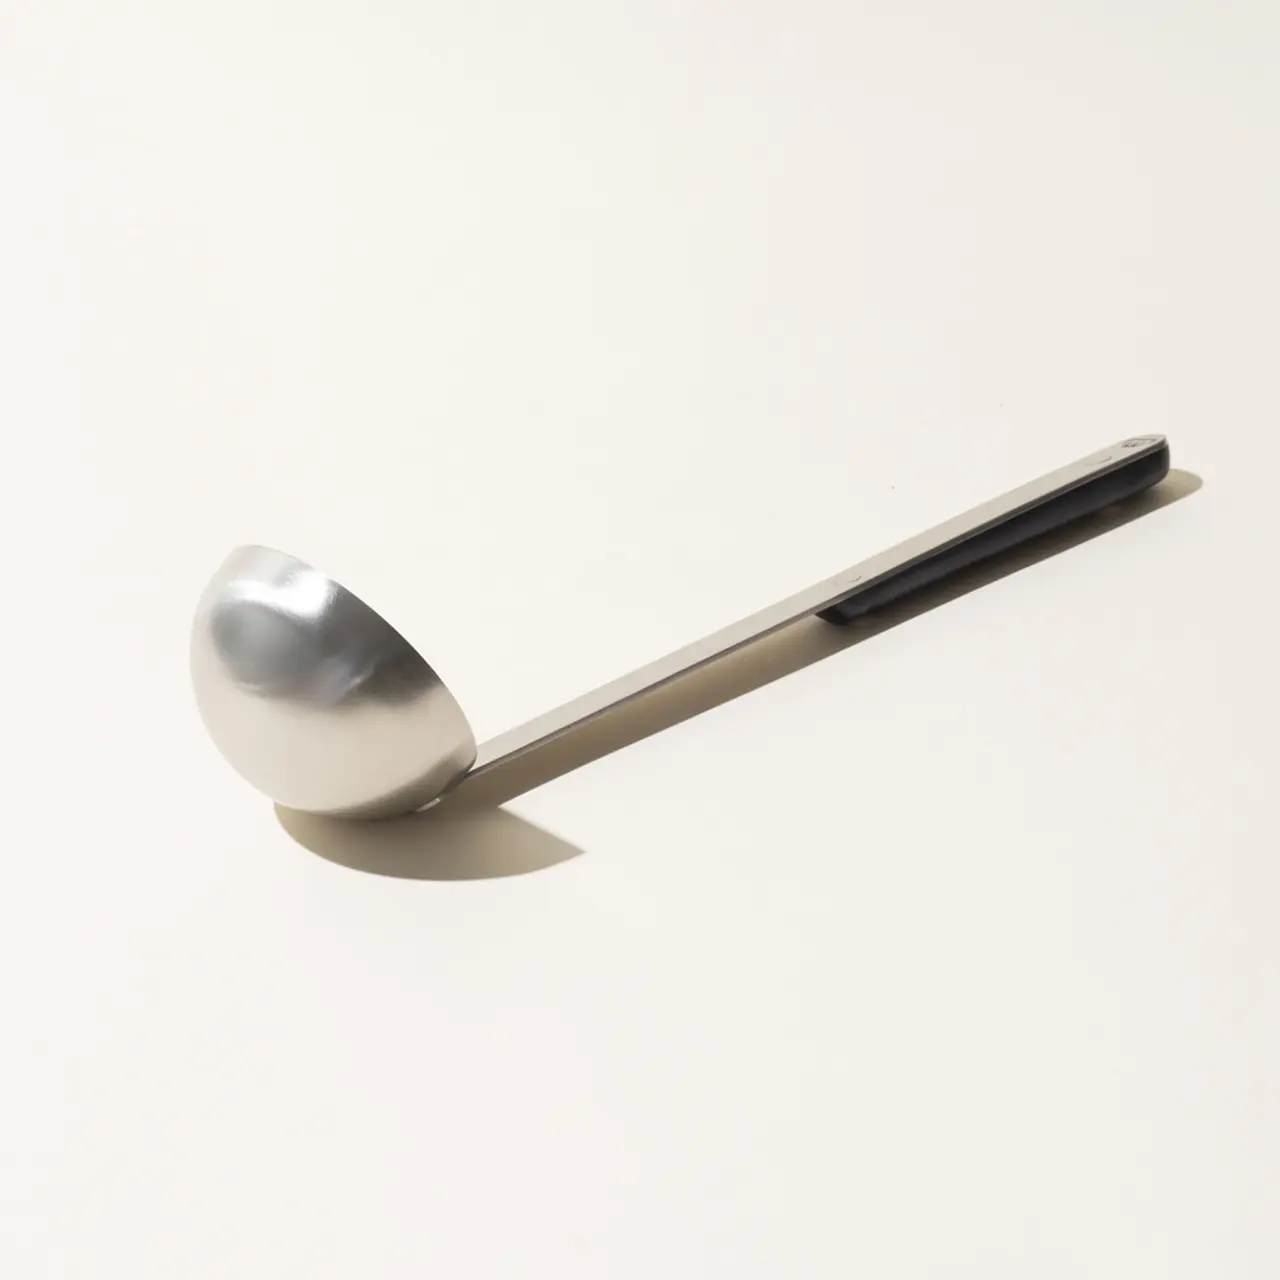 A single stainless steel spoon is centered on a plain light background, lying with the bowl facing up.